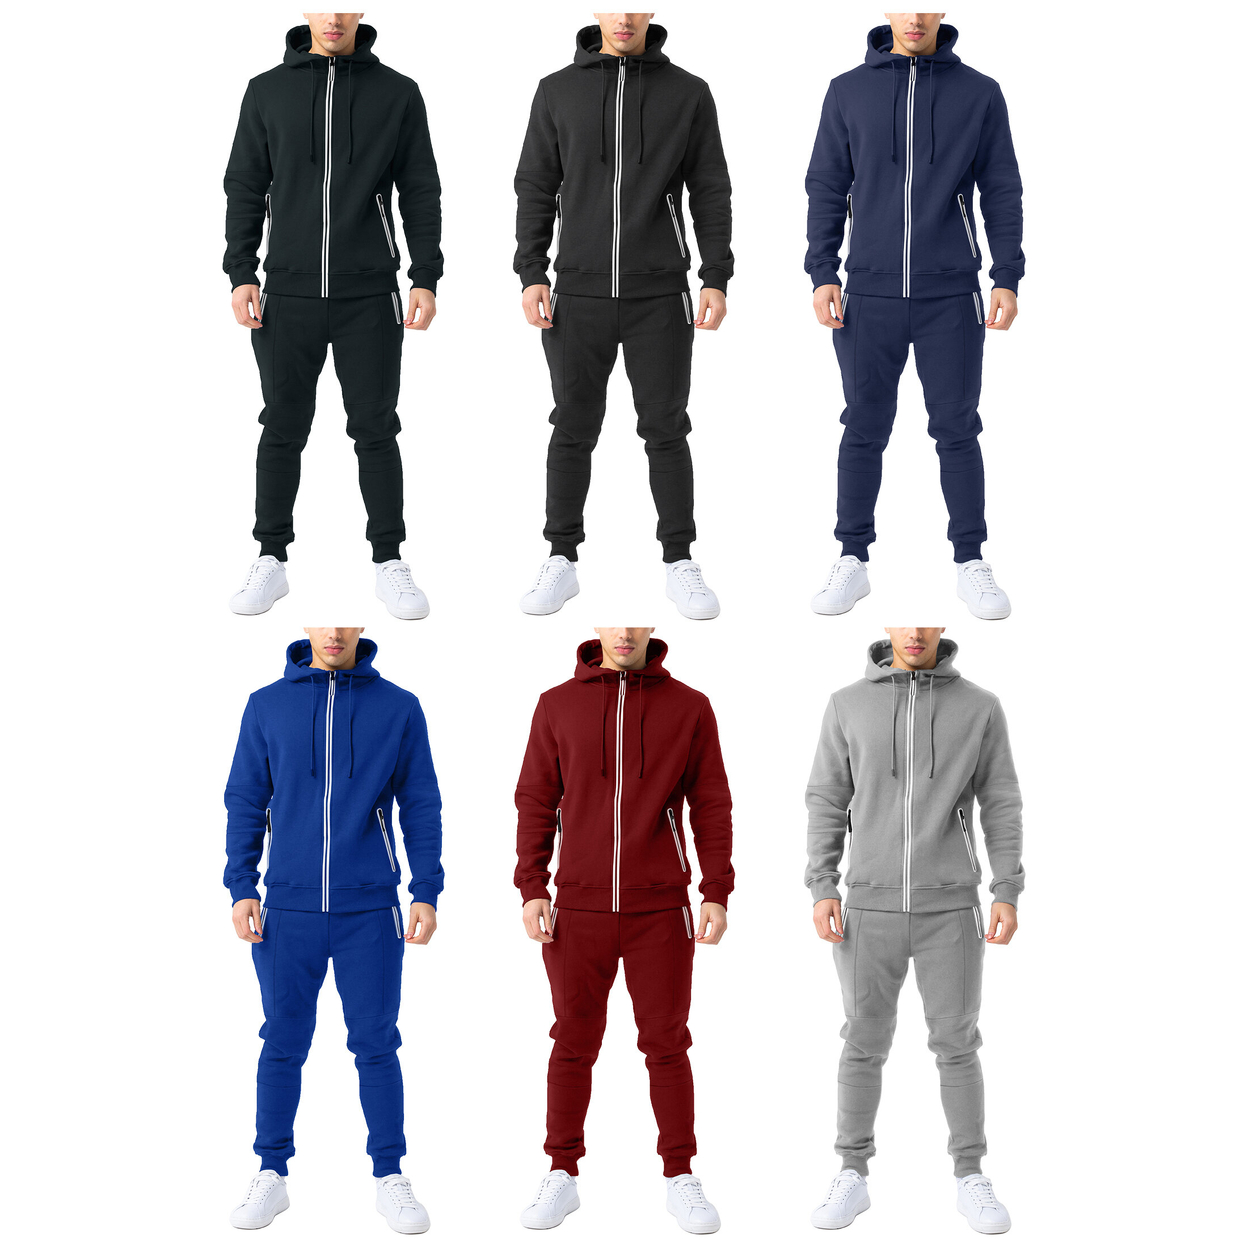 2-Pack: Men's Cozy Slim Fit Active Athletic Full Zip Hoodie And Jogger Tracksuit - Black & Blue, 4xl